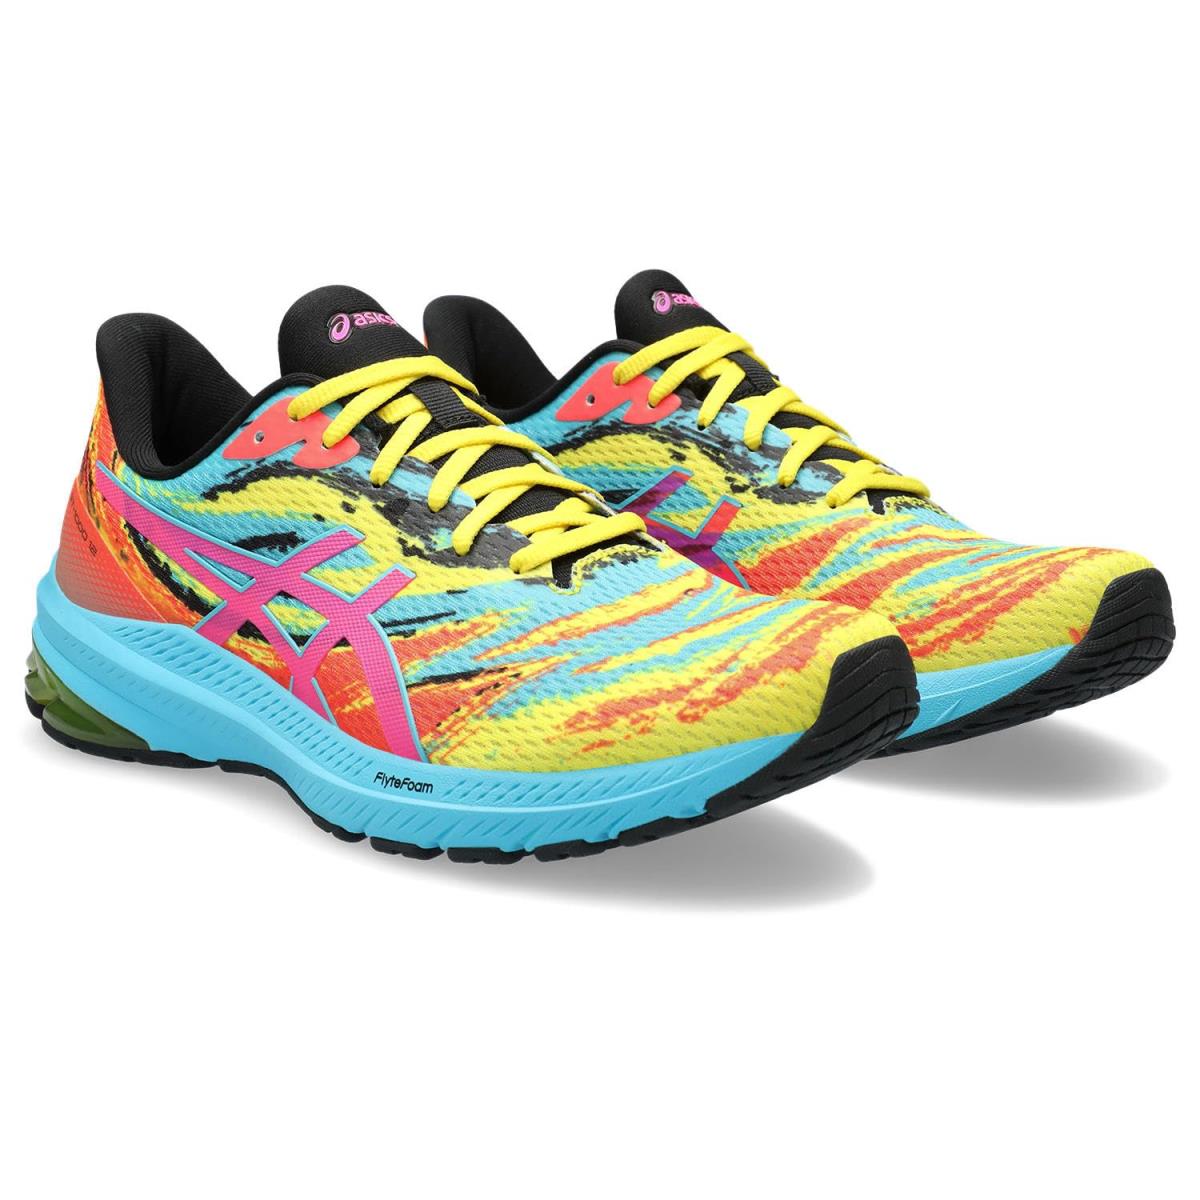 Man`s Sneakers Athletic Shoes Asics GT-1000 12 Vibrant Yellow/Hot Pink